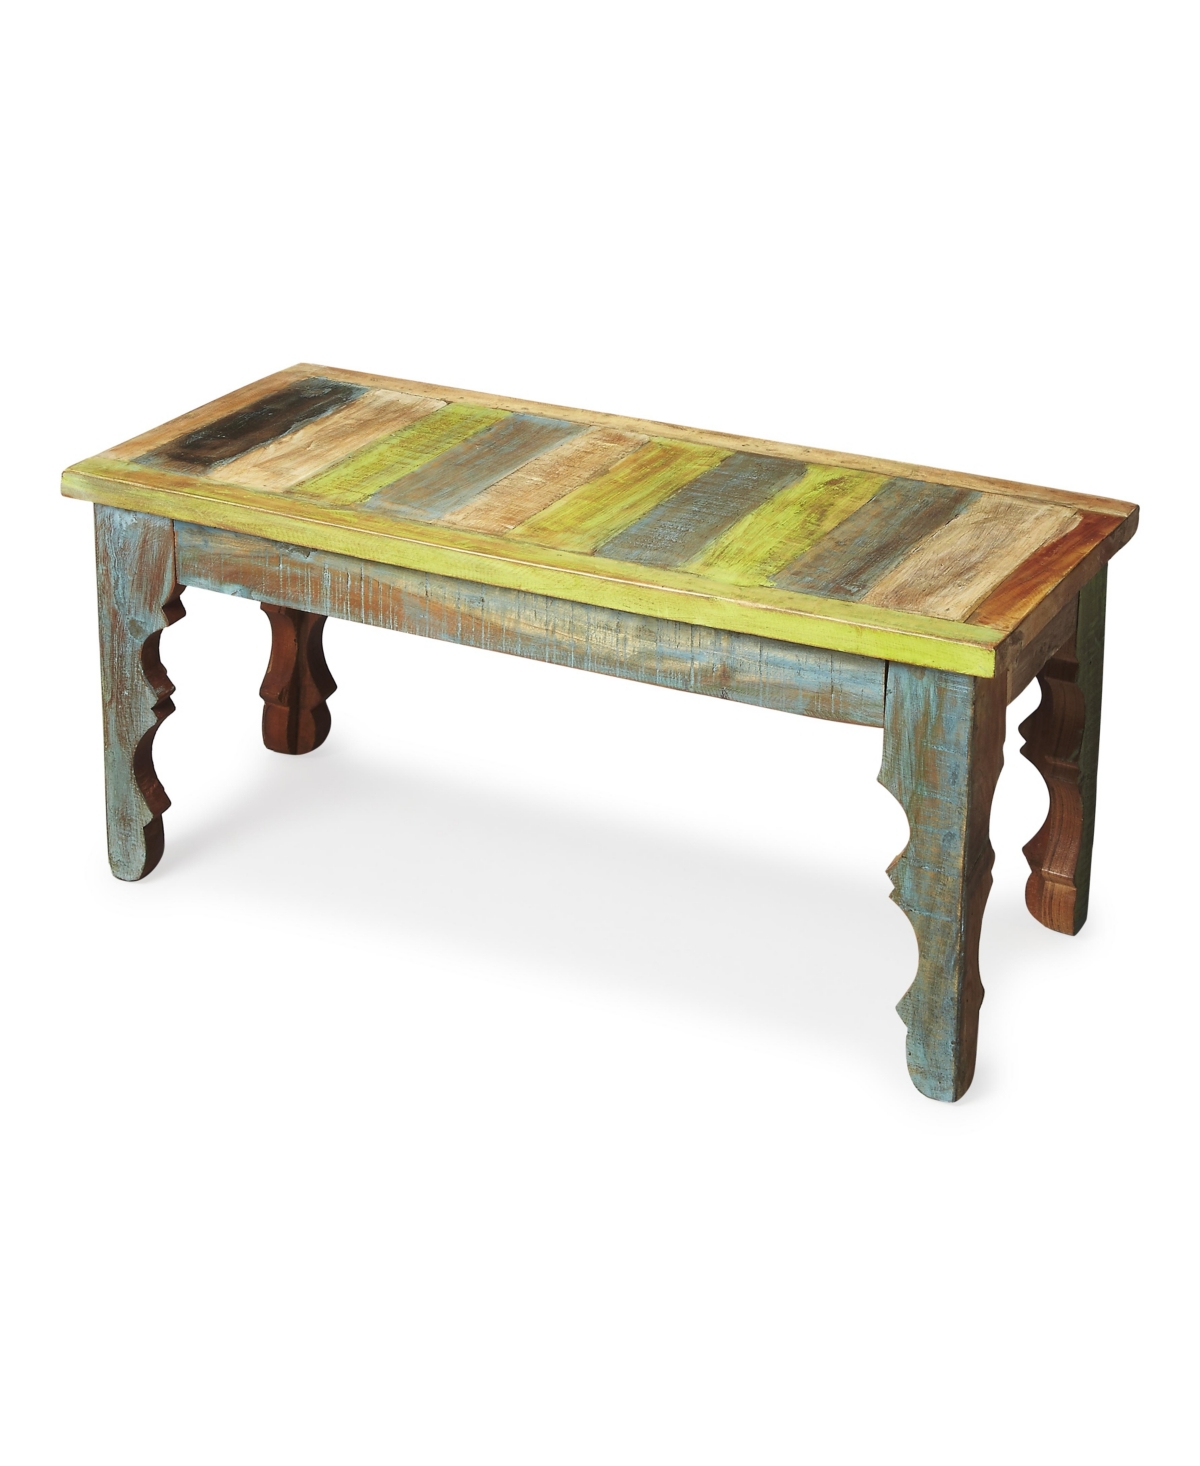 Rao Painted Wood Bench